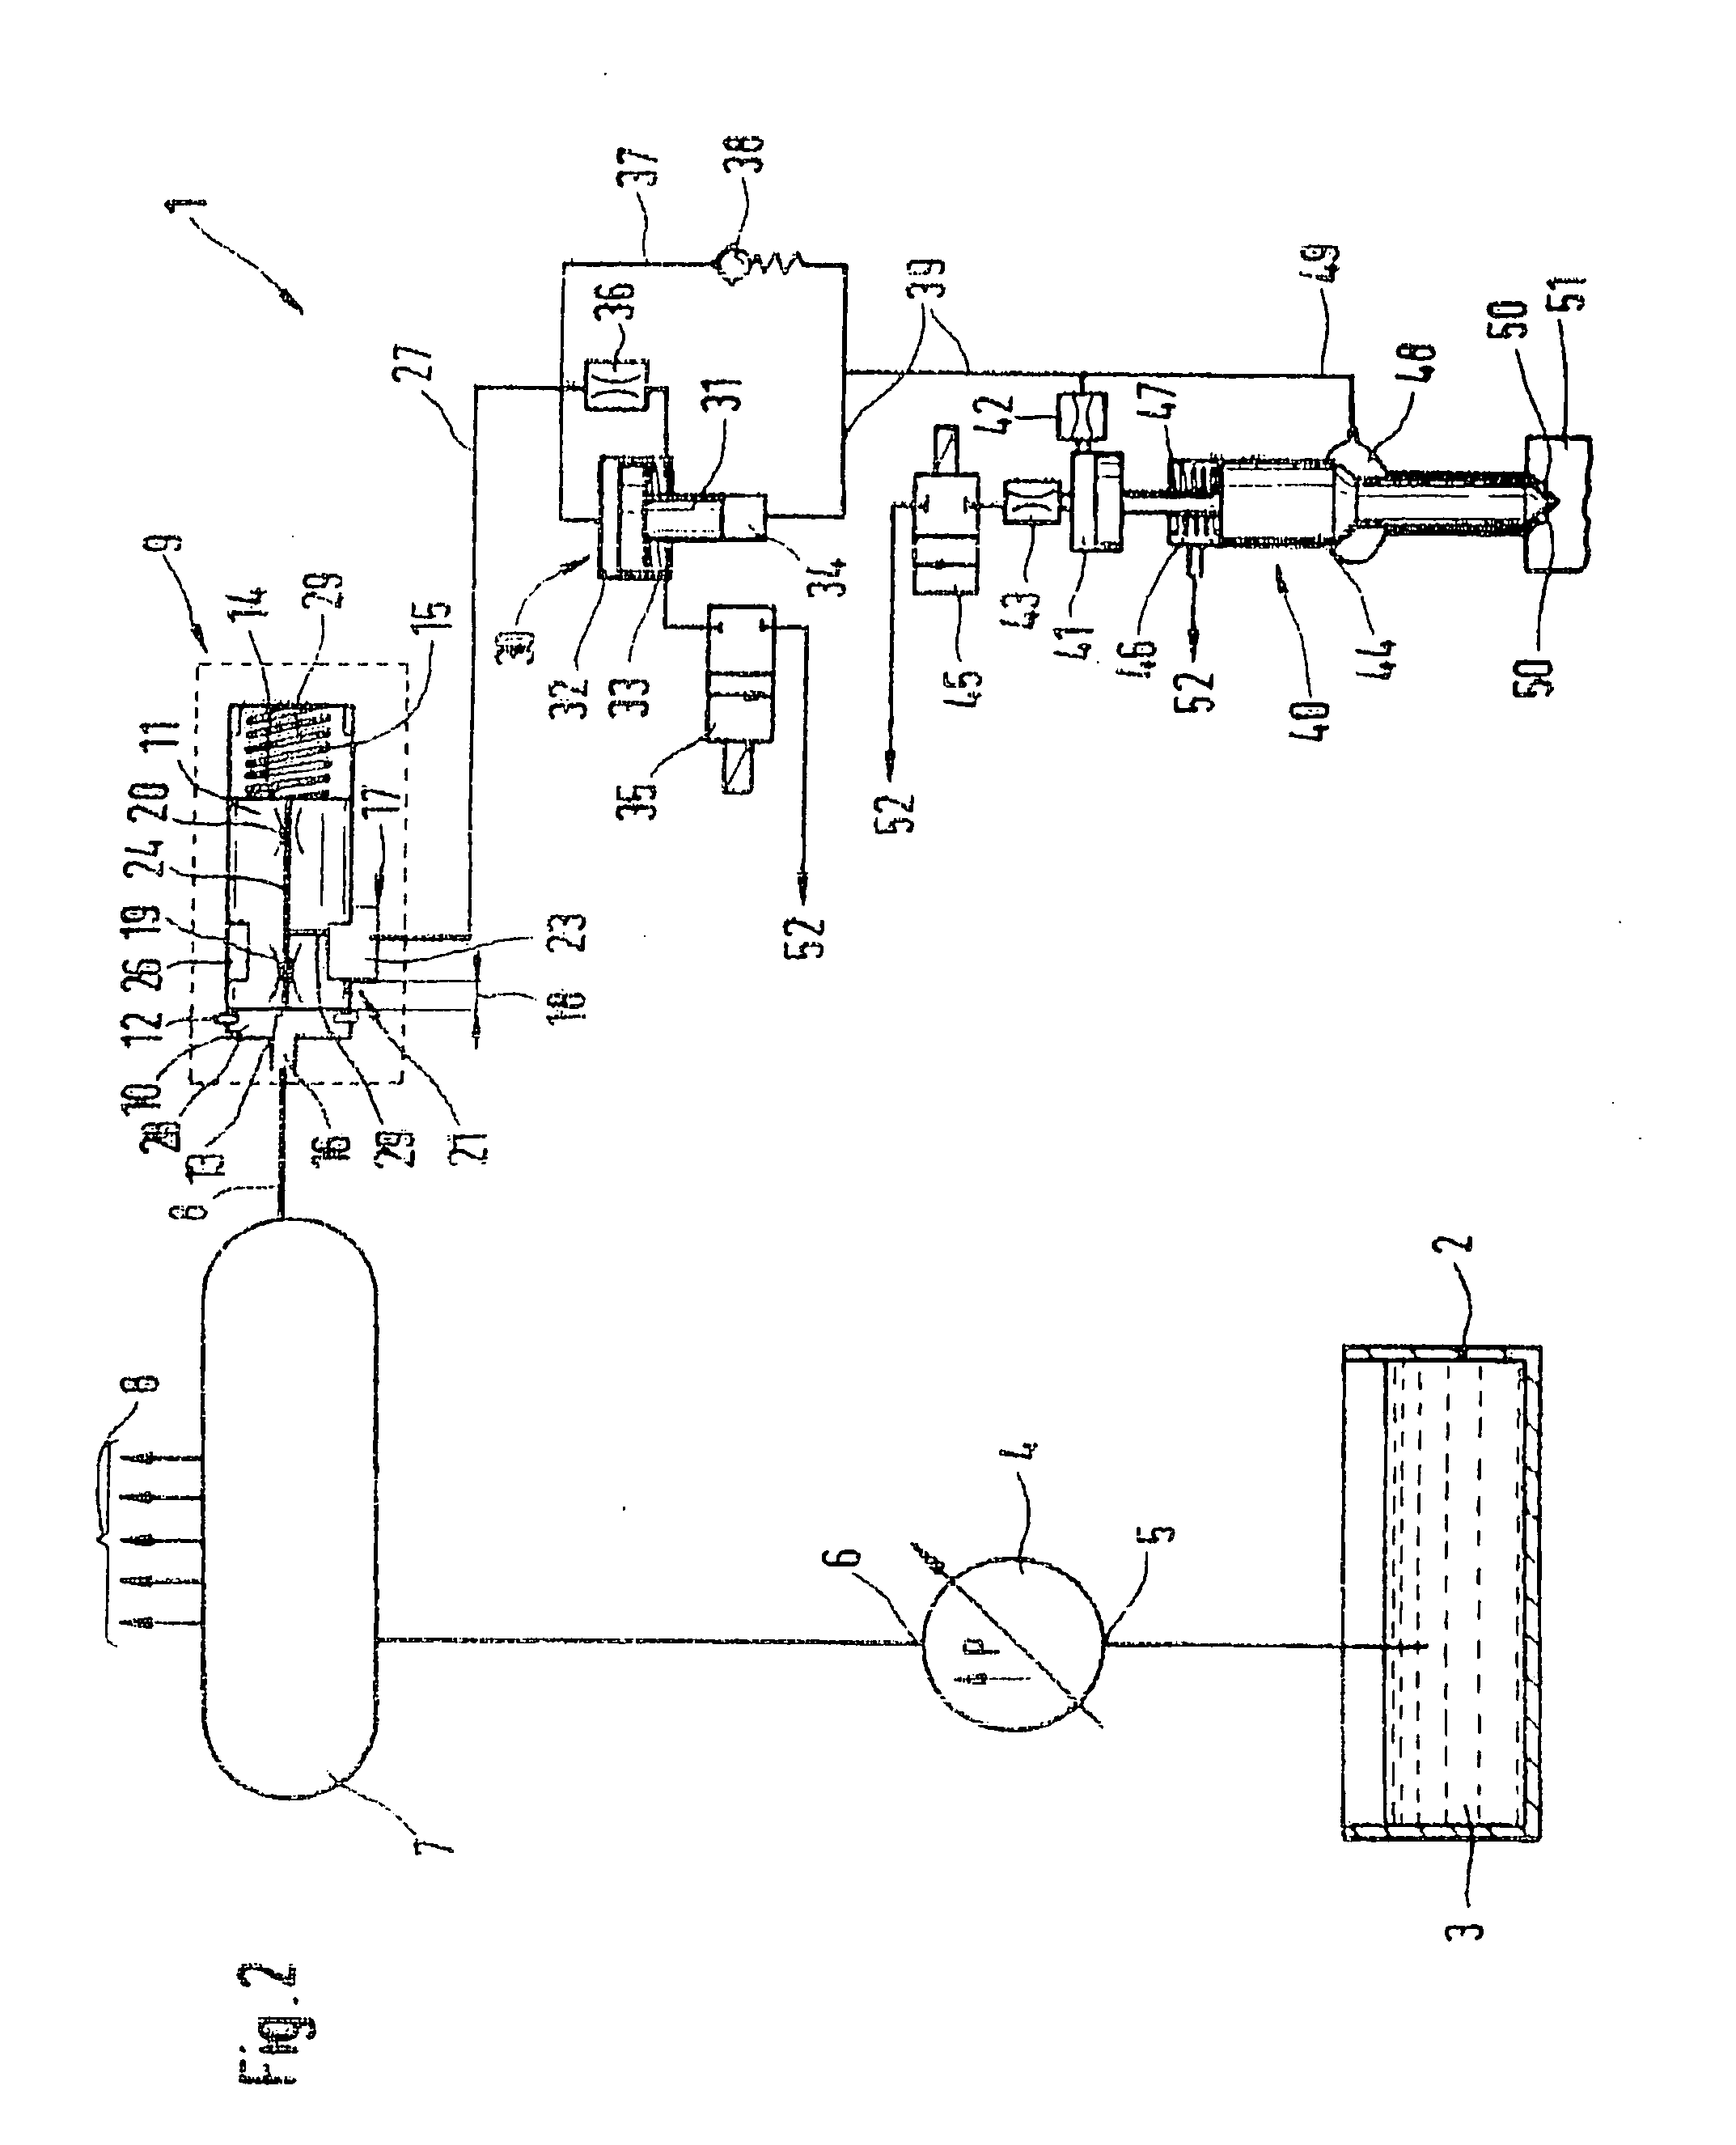 Fuel injection apparatus including device for suppressing pressure waves in reservoir injection systems